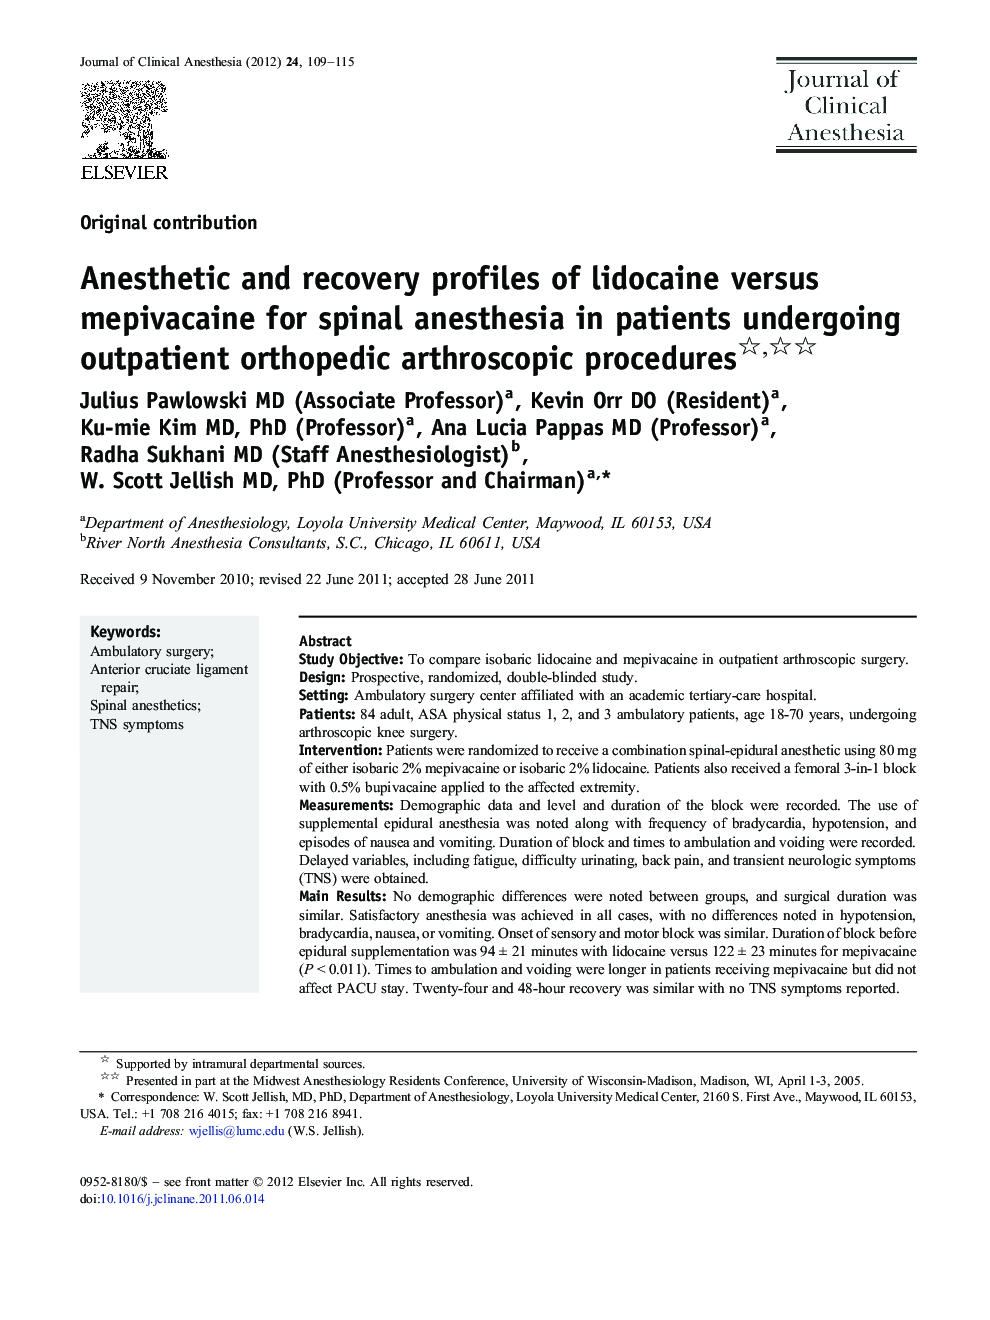 Anesthetic and recovery profiles of lidocaine versus mepivacaine for spinal anesthesia in patients undergoing outpatient orthopedic arthroscopic procedures 